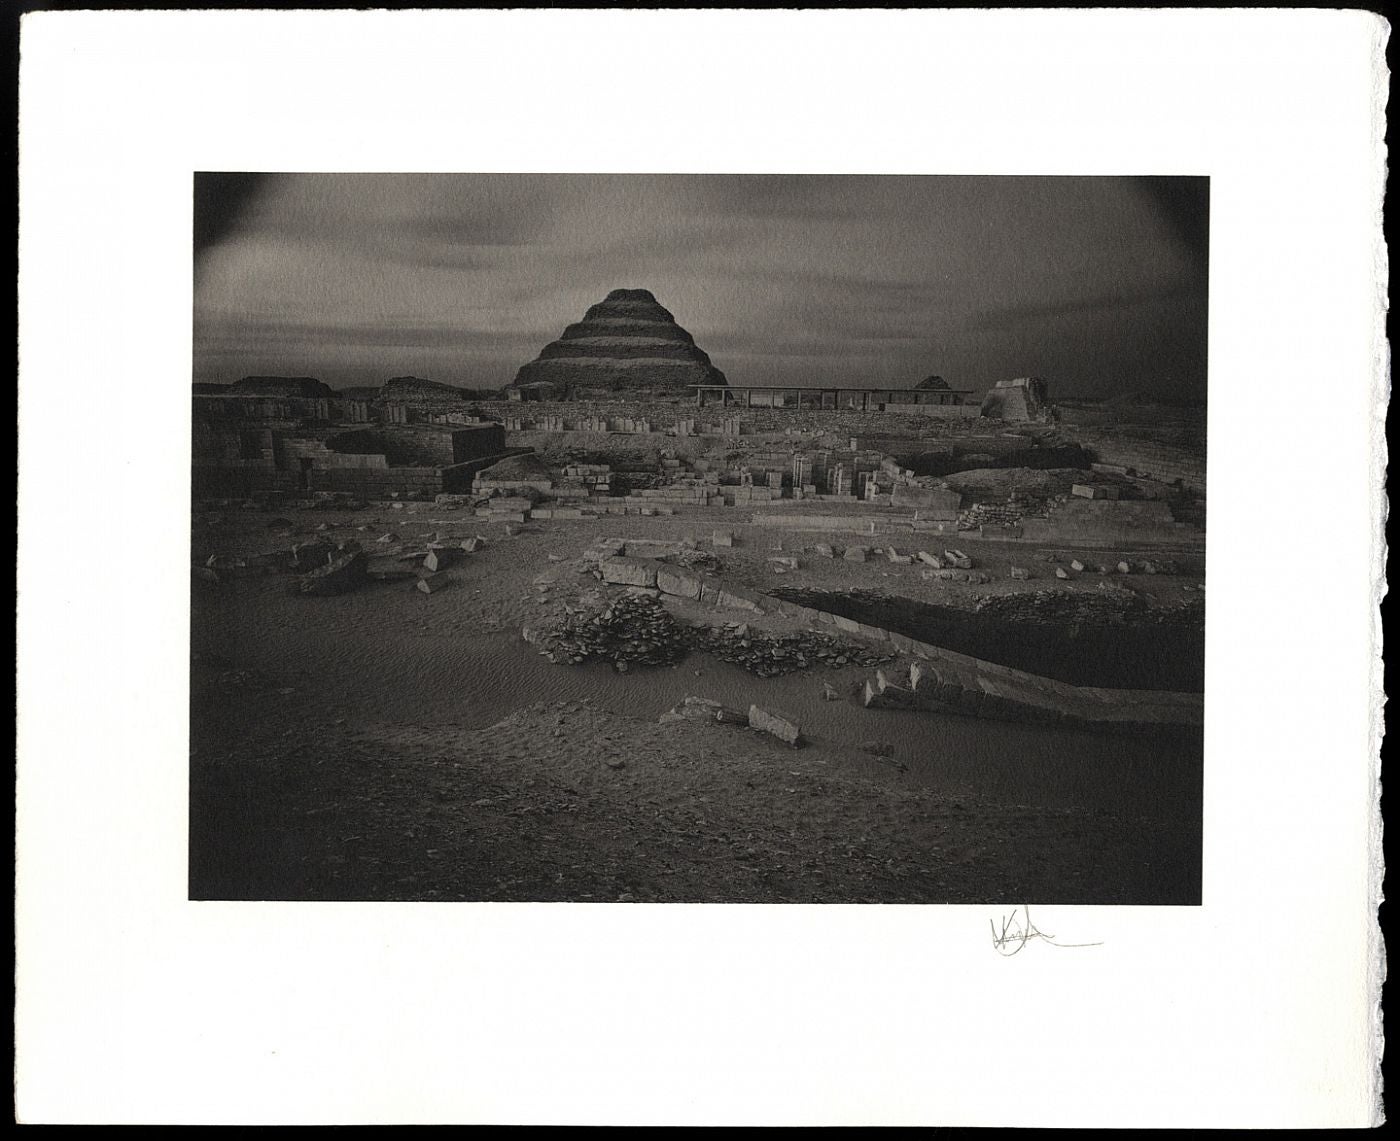 Kenro Izu: Sacred Places, Limited Edition (with Platinum Print) [SIGNED]